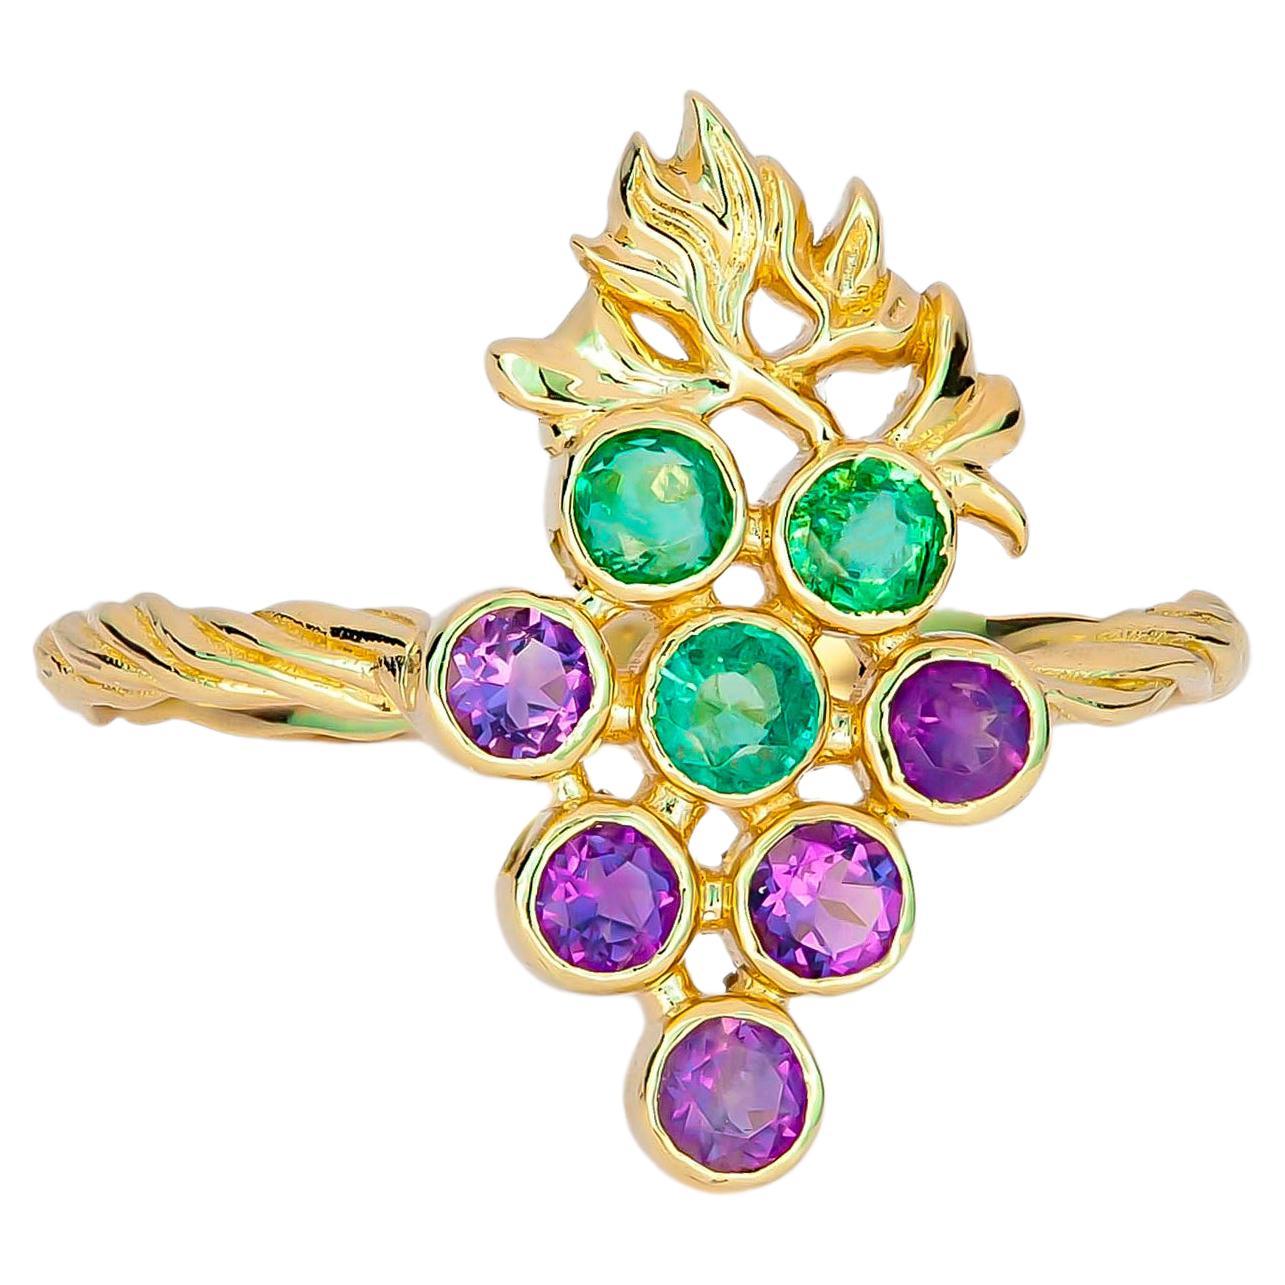 For Sale:  14k Gold Ring with Natural Emeralds and Amethysts. Grape gold ring.